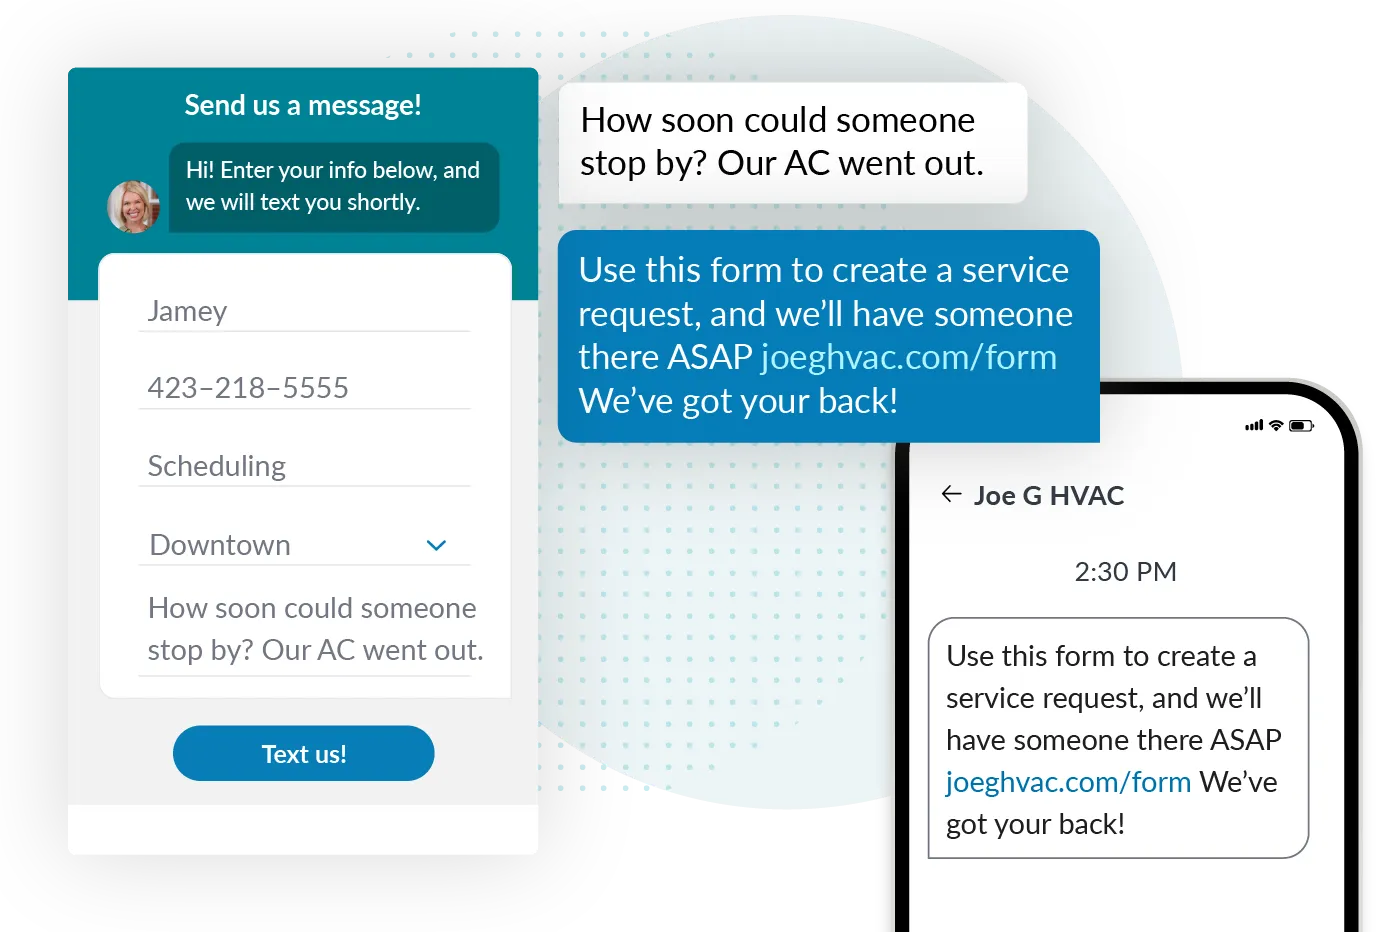 start-texts-from-your-hvac-website-with-sms-chat